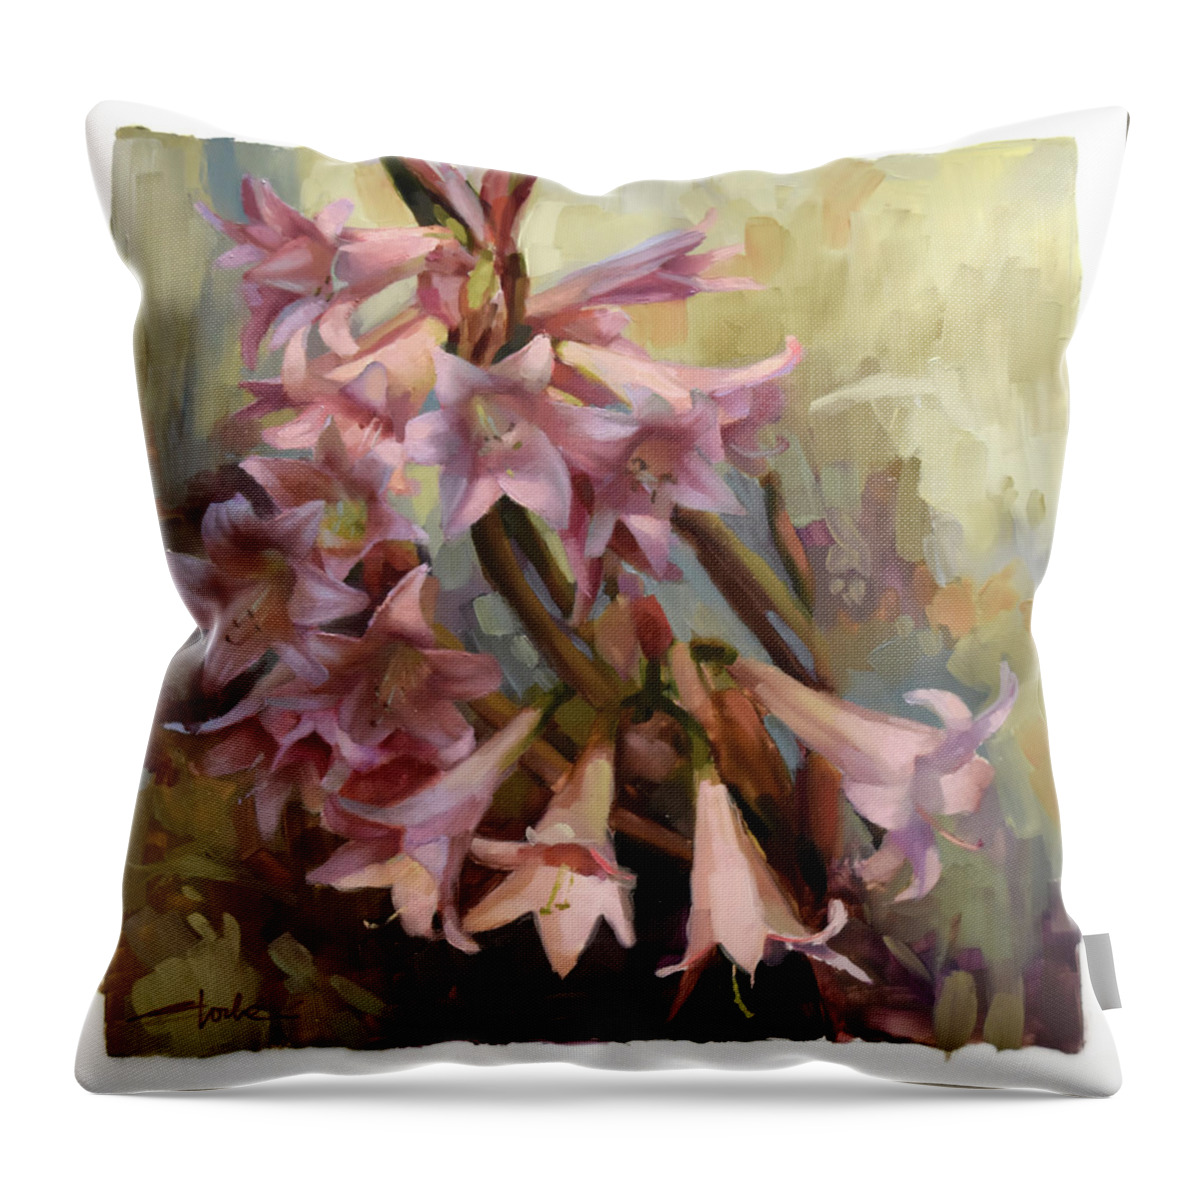 Pink Ladies Throw Pillow featuring the painting Pink Ladies by Cathy Locke